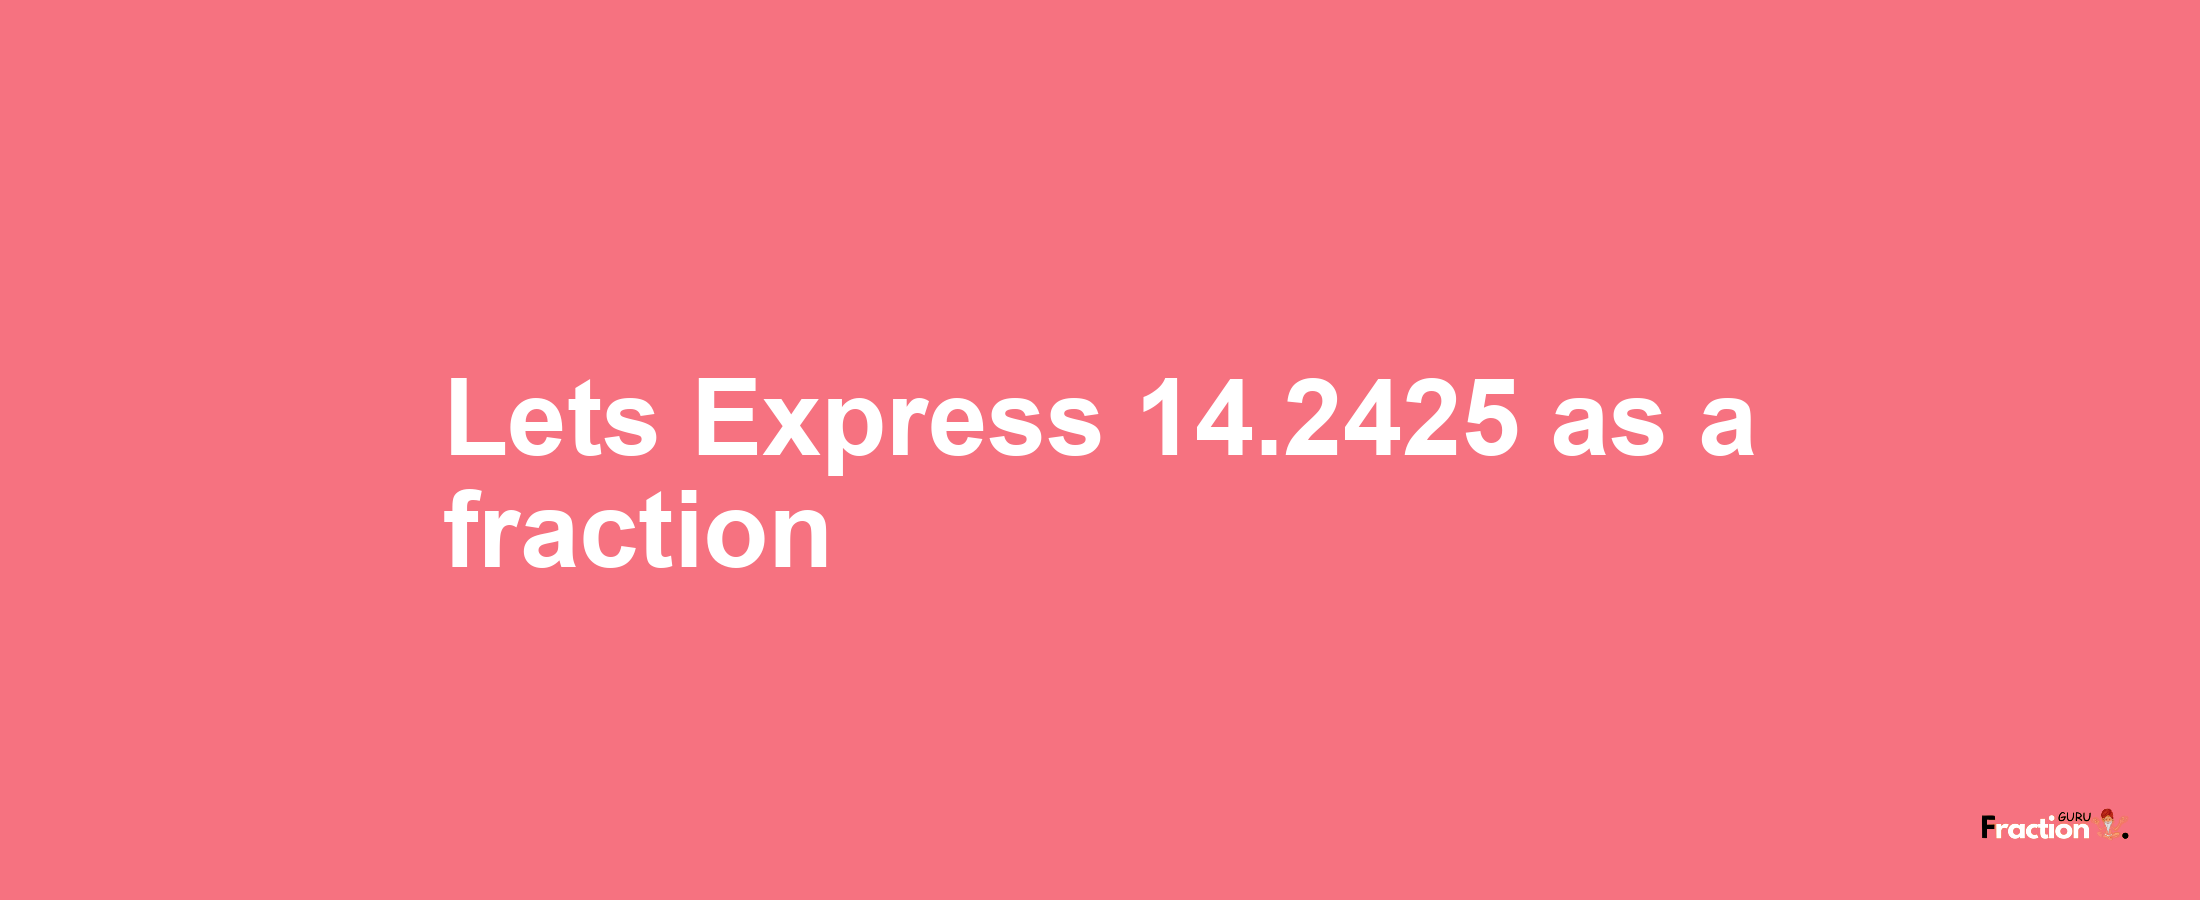 Lets Express 14.2425 as afraction